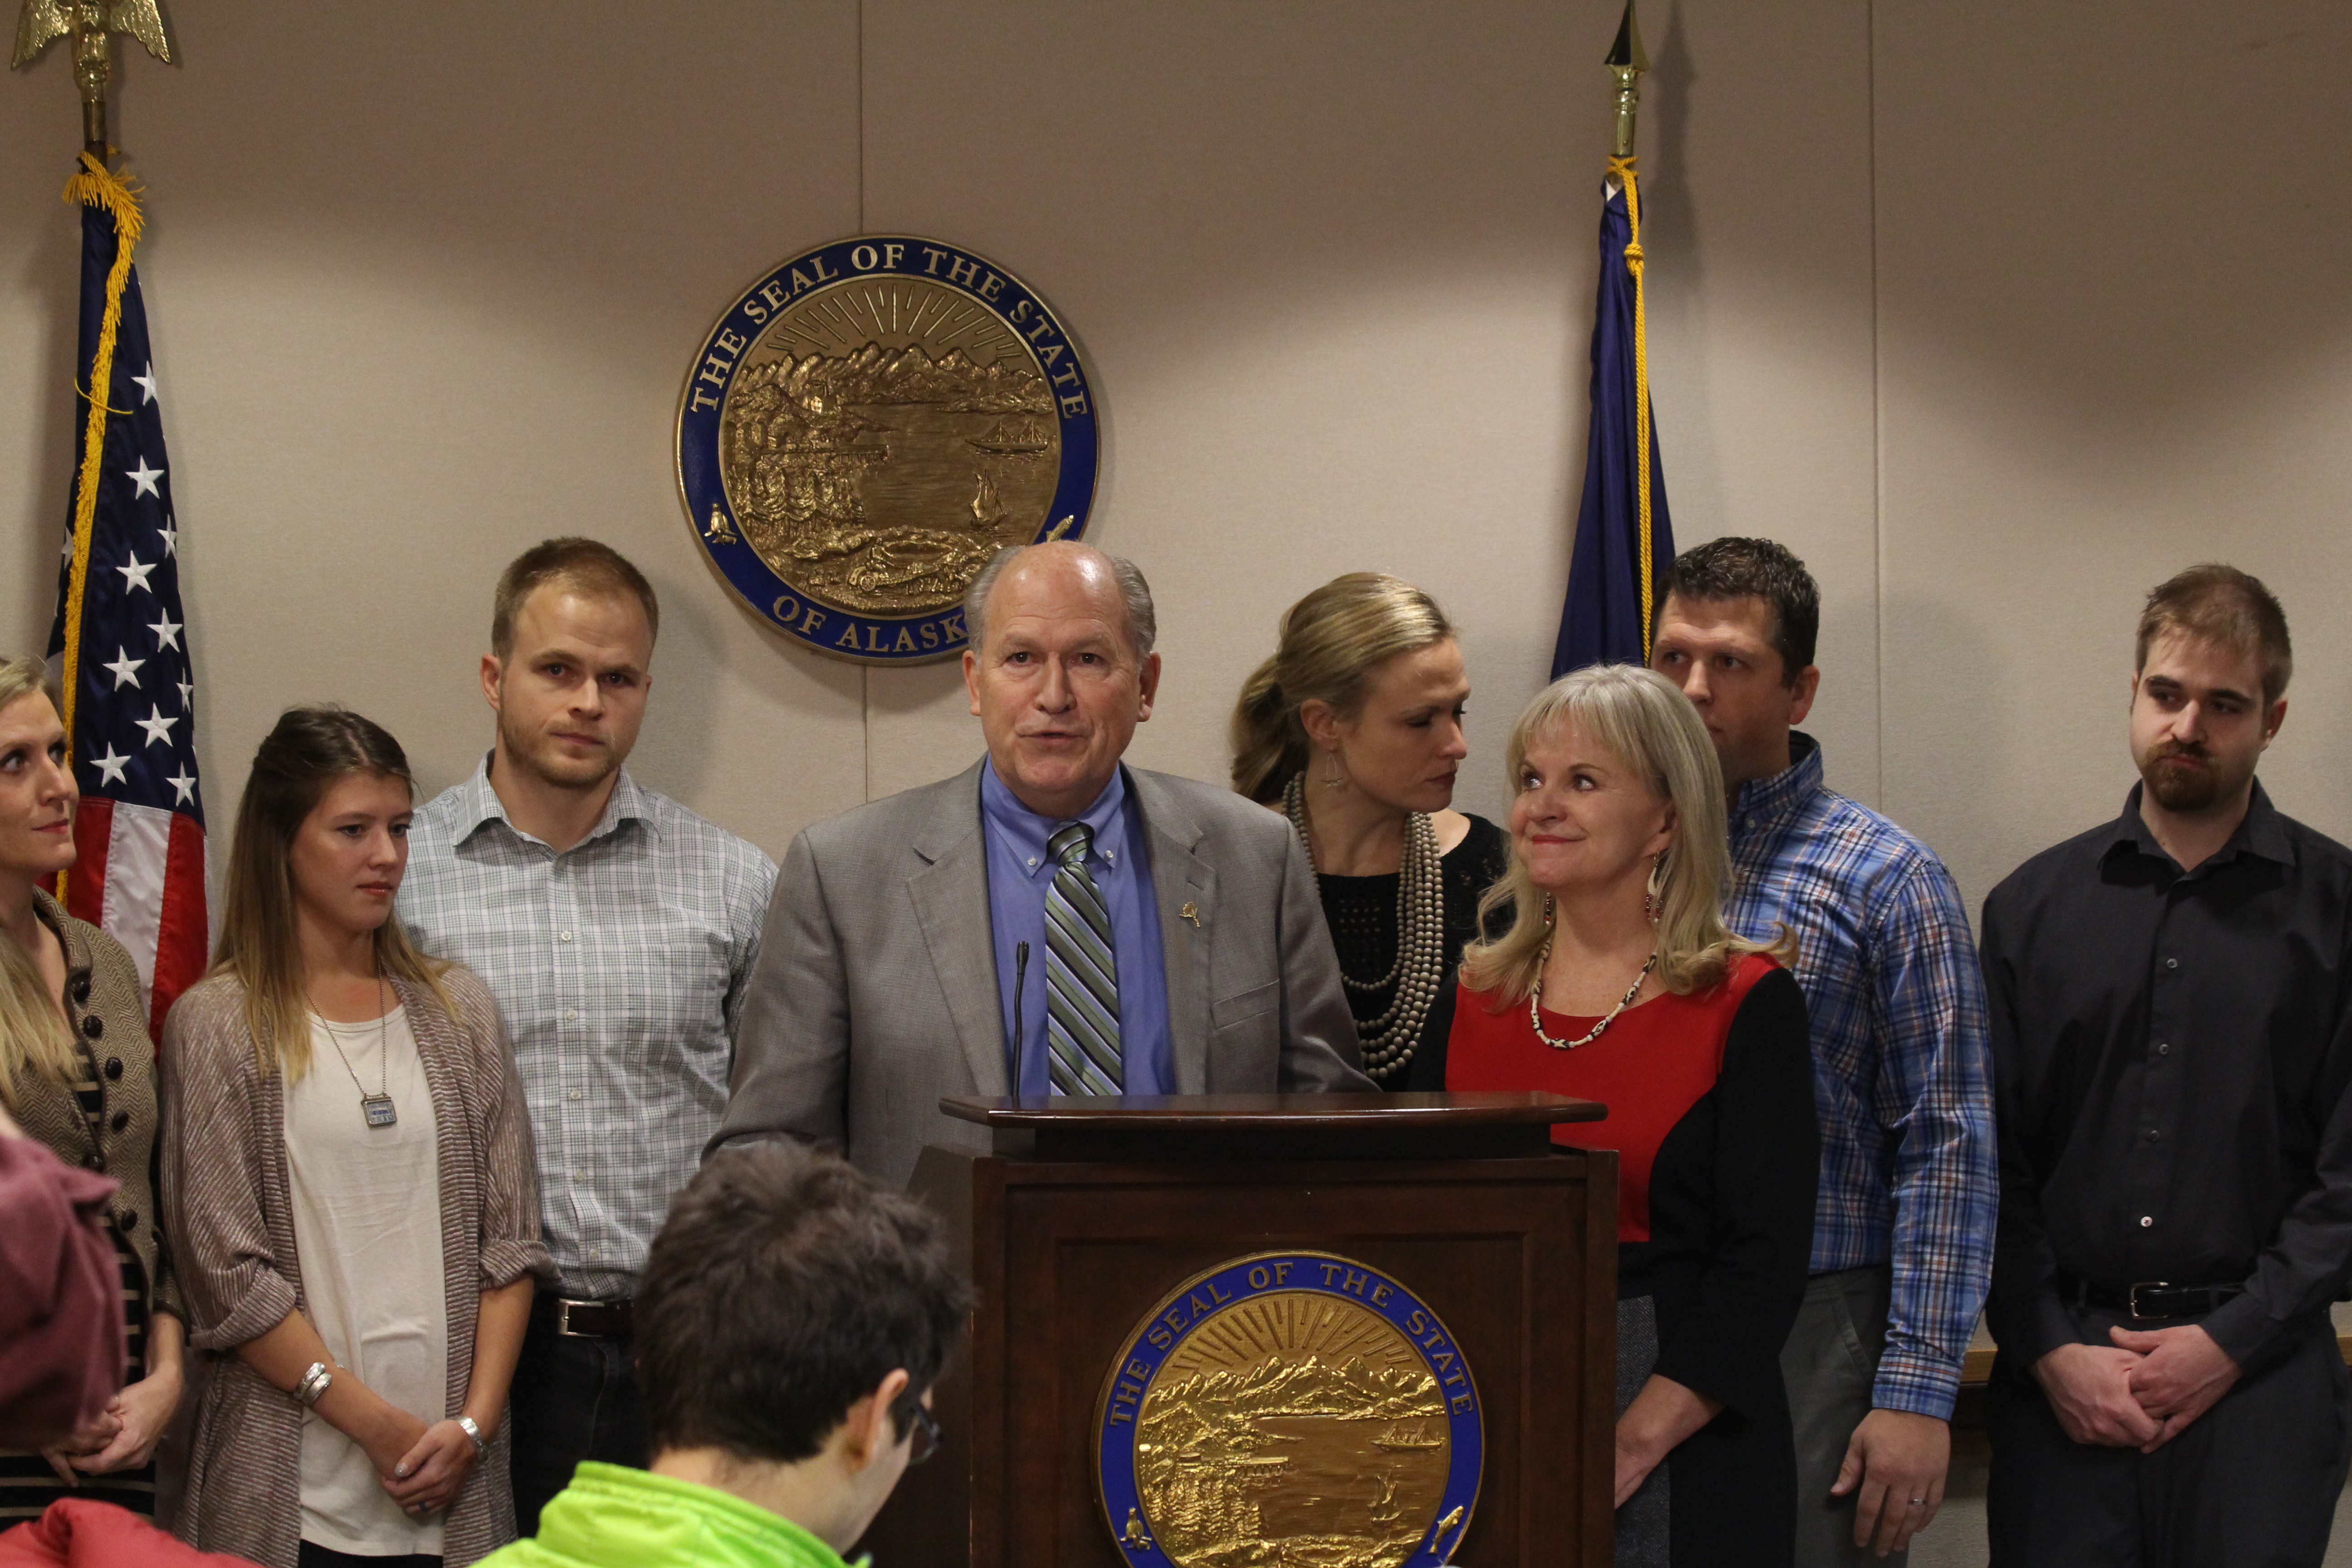 Bill Walker and (from left to right) Tessa Linderman (daughter), Sabrina Walker (daughter-in-law), Adam Walker (son), Lindsay Hobson (daughter), First Lady Donna Walker, Greg Hobson (son-in-law) and Jordan walker (son), as Governor Walker talks to press about his prostate cancer diagnosis. Not pictured: Lt. Governor Byron Mallott and Walker's brother Bob Walker. (Photo by Wesley Early, Alaska Public Media - Anchorage)